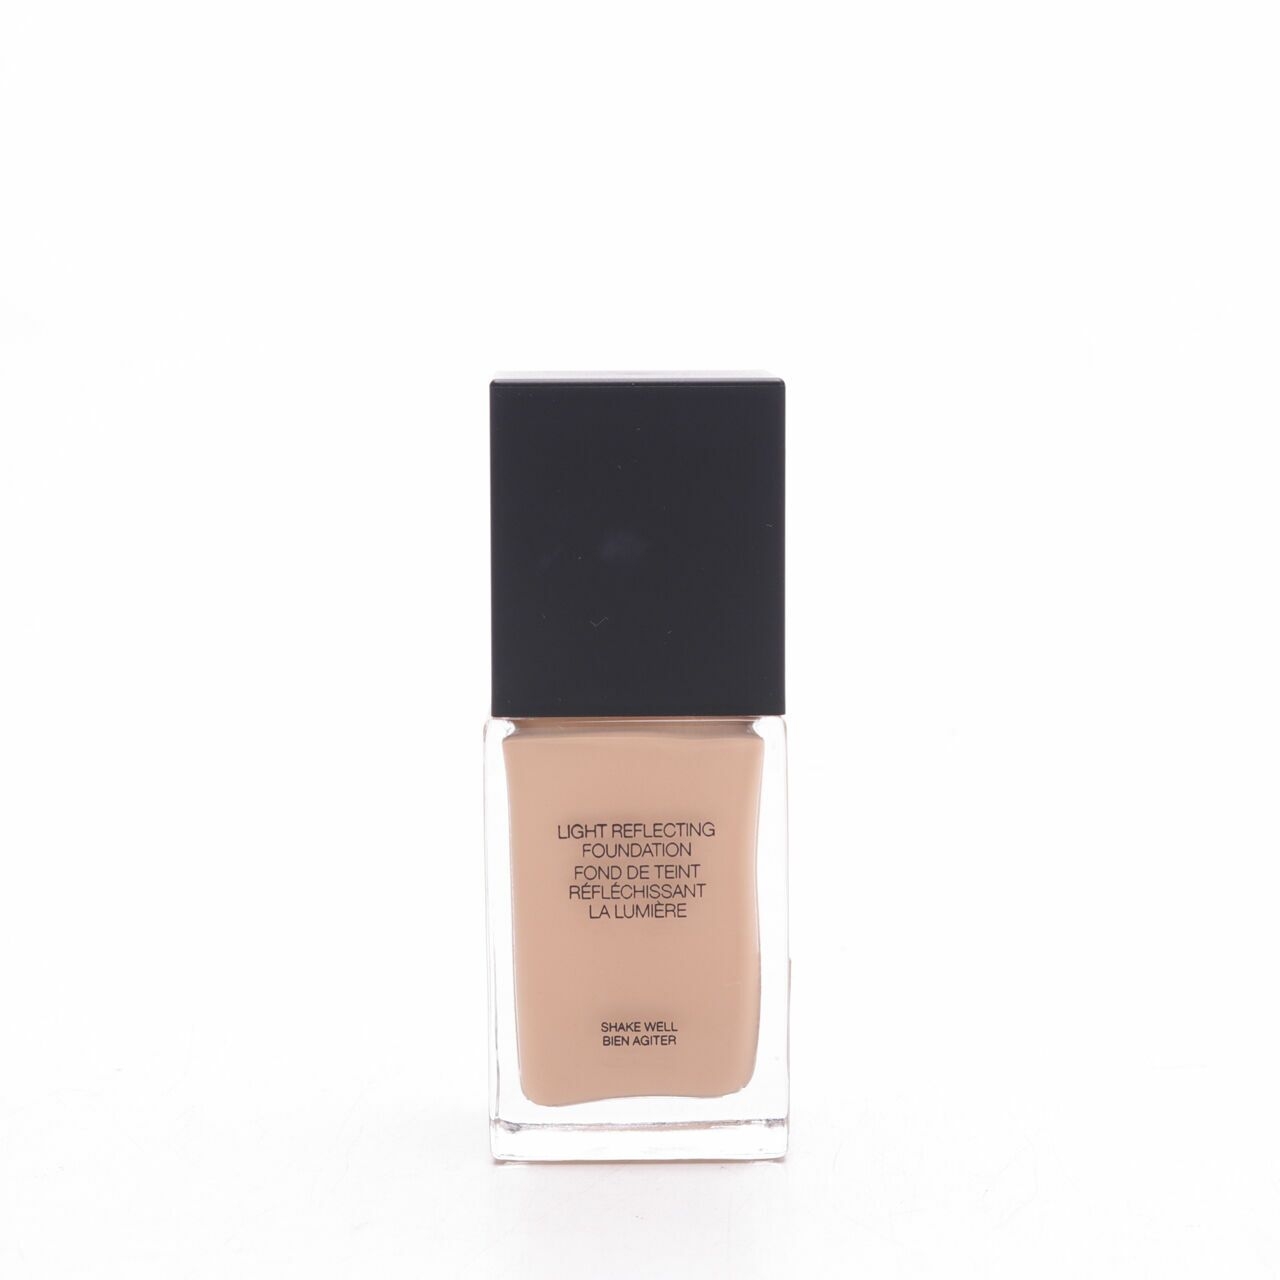 Nars Light Reflecting Foundation - Deauville Faces	